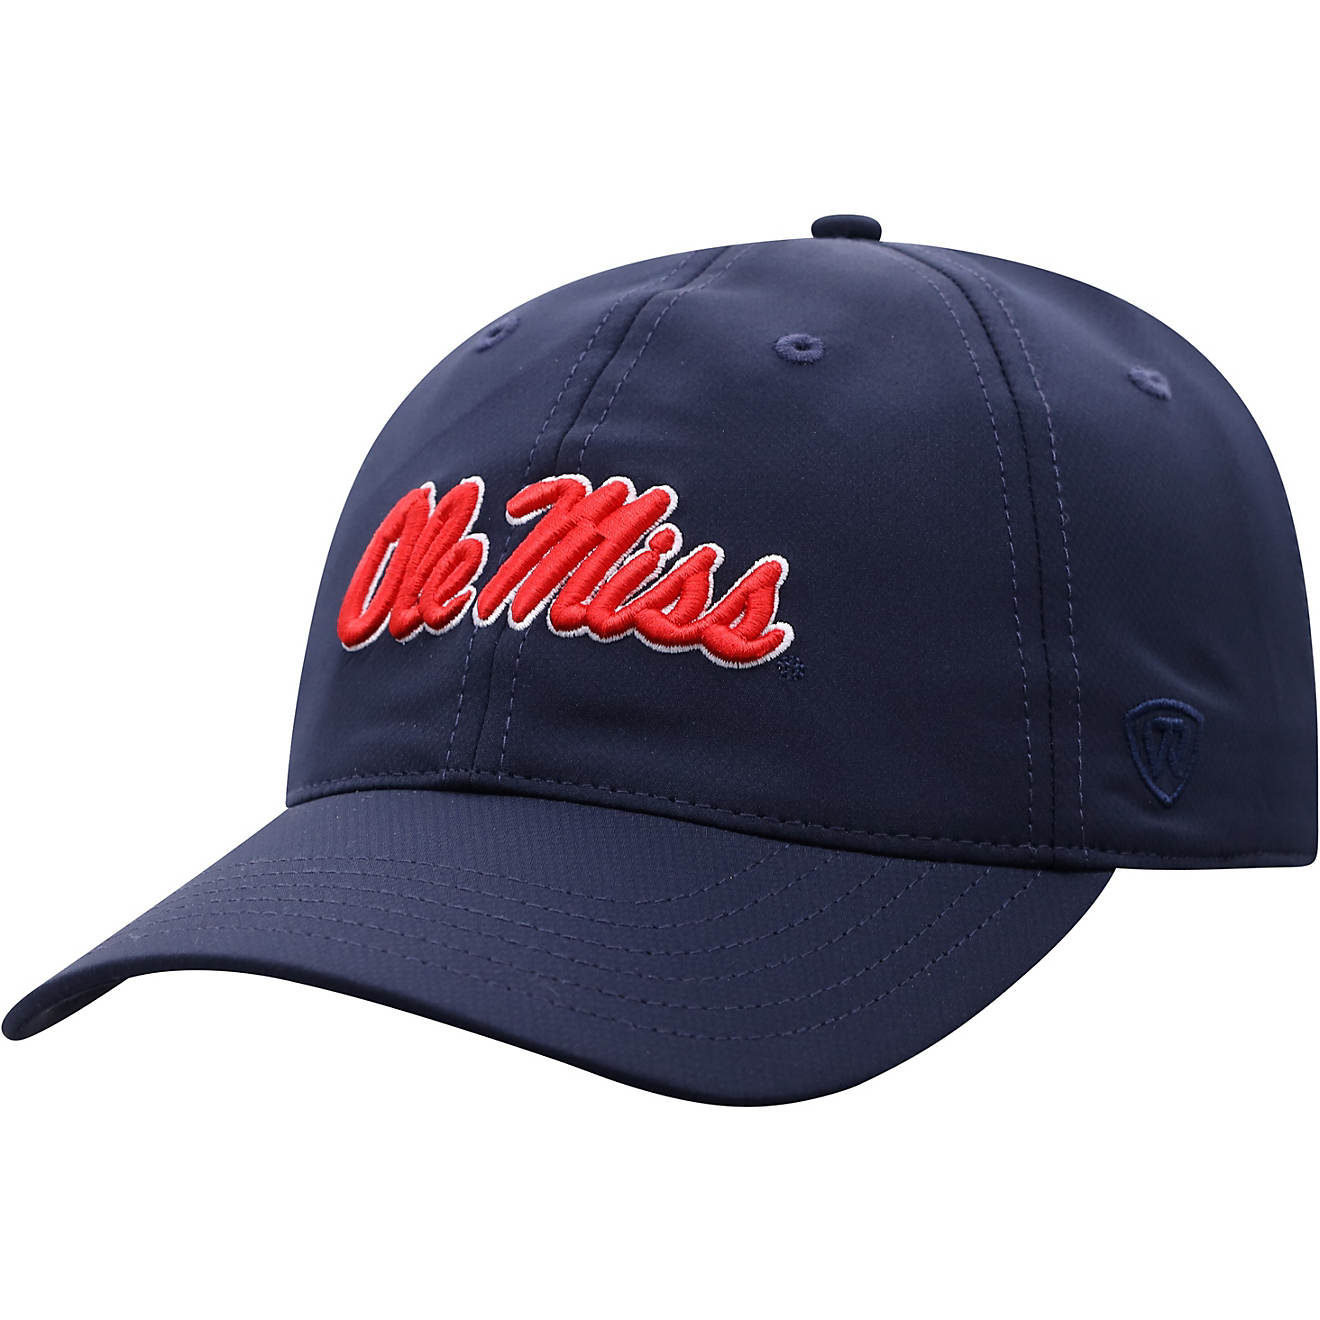 Top of the World University of Mississippi Trainer 20 Adjustable Cap                                                             - view number 1